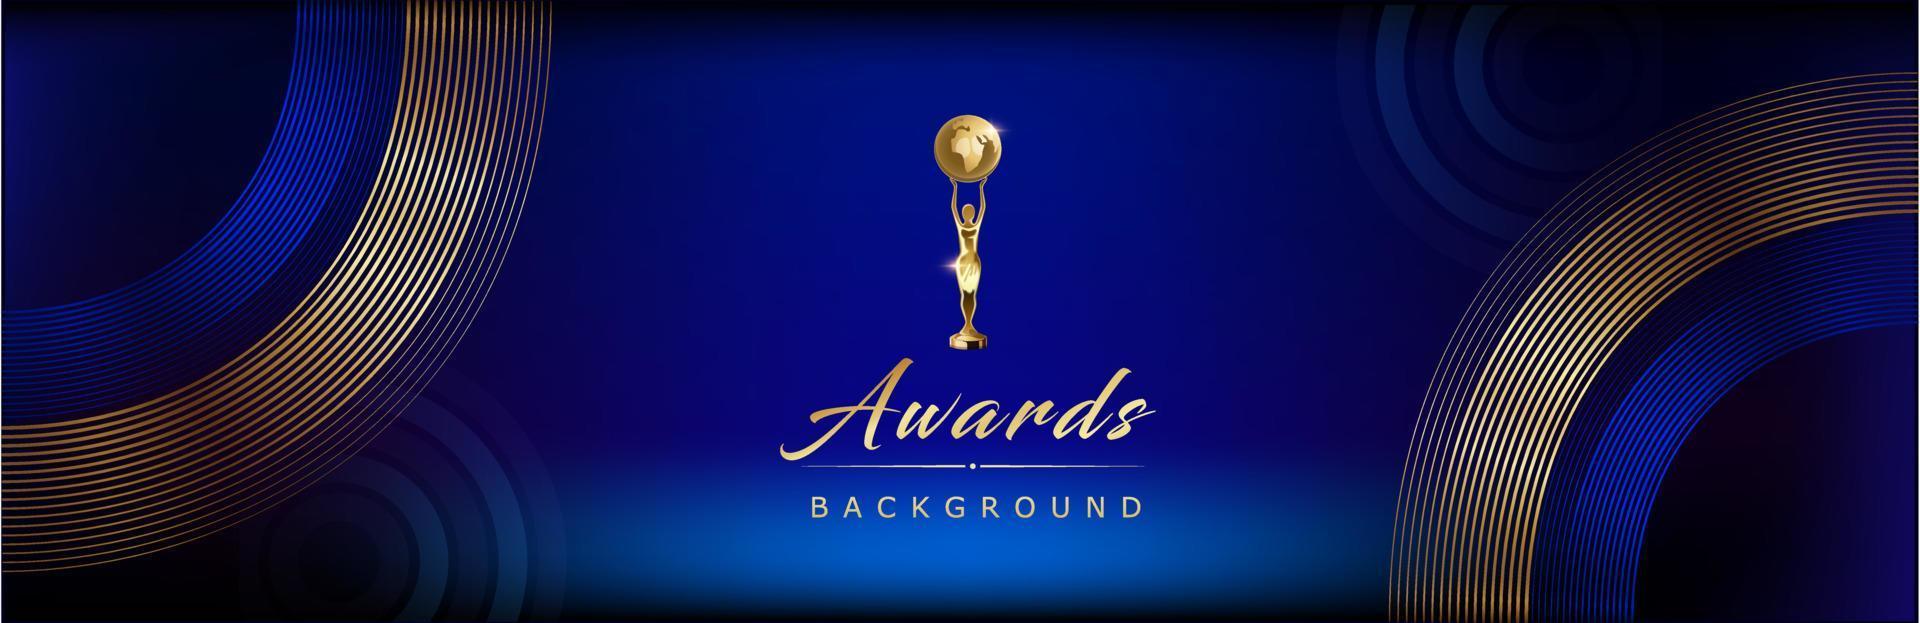 Dark Blue Golden Royal Awards Graphics Background Lines Circle Round Ring Elegant Shine Modern Blended Template Luxury Premium Corporate Abstract Design Template Banner Certificate Dynamic Shape vector